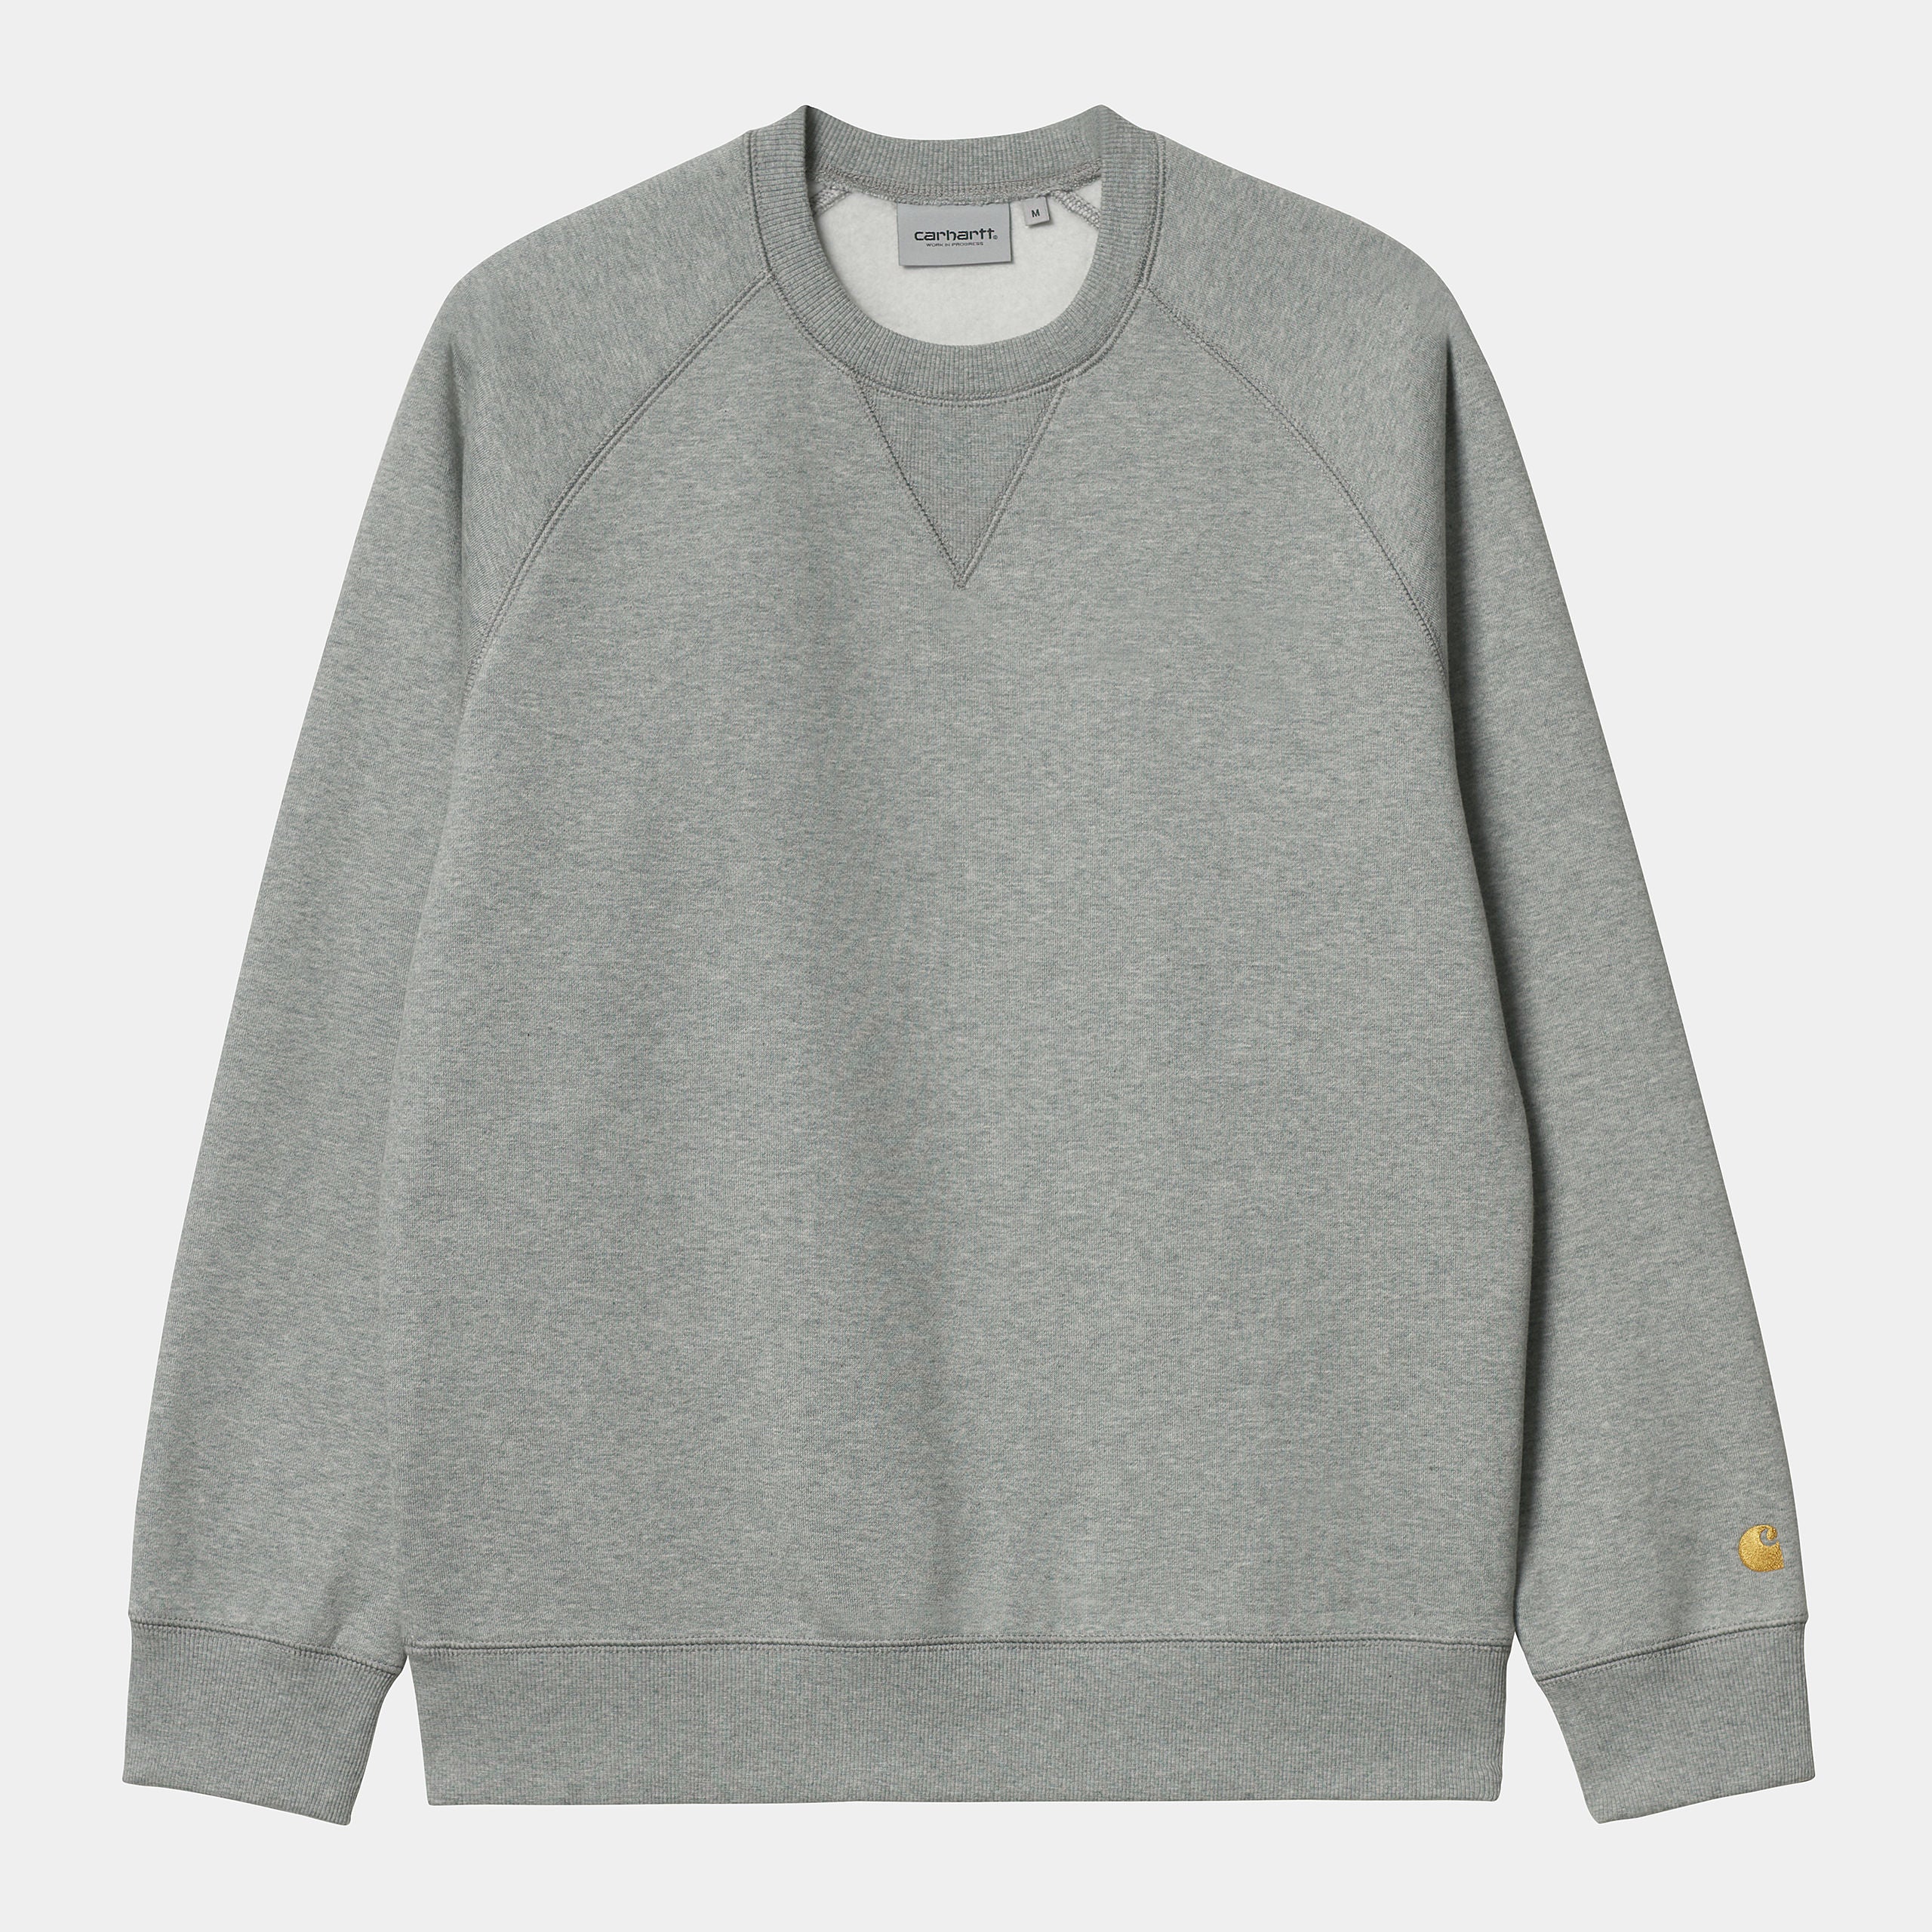 Chase Sweat-Grey Heather / Gold - Full View